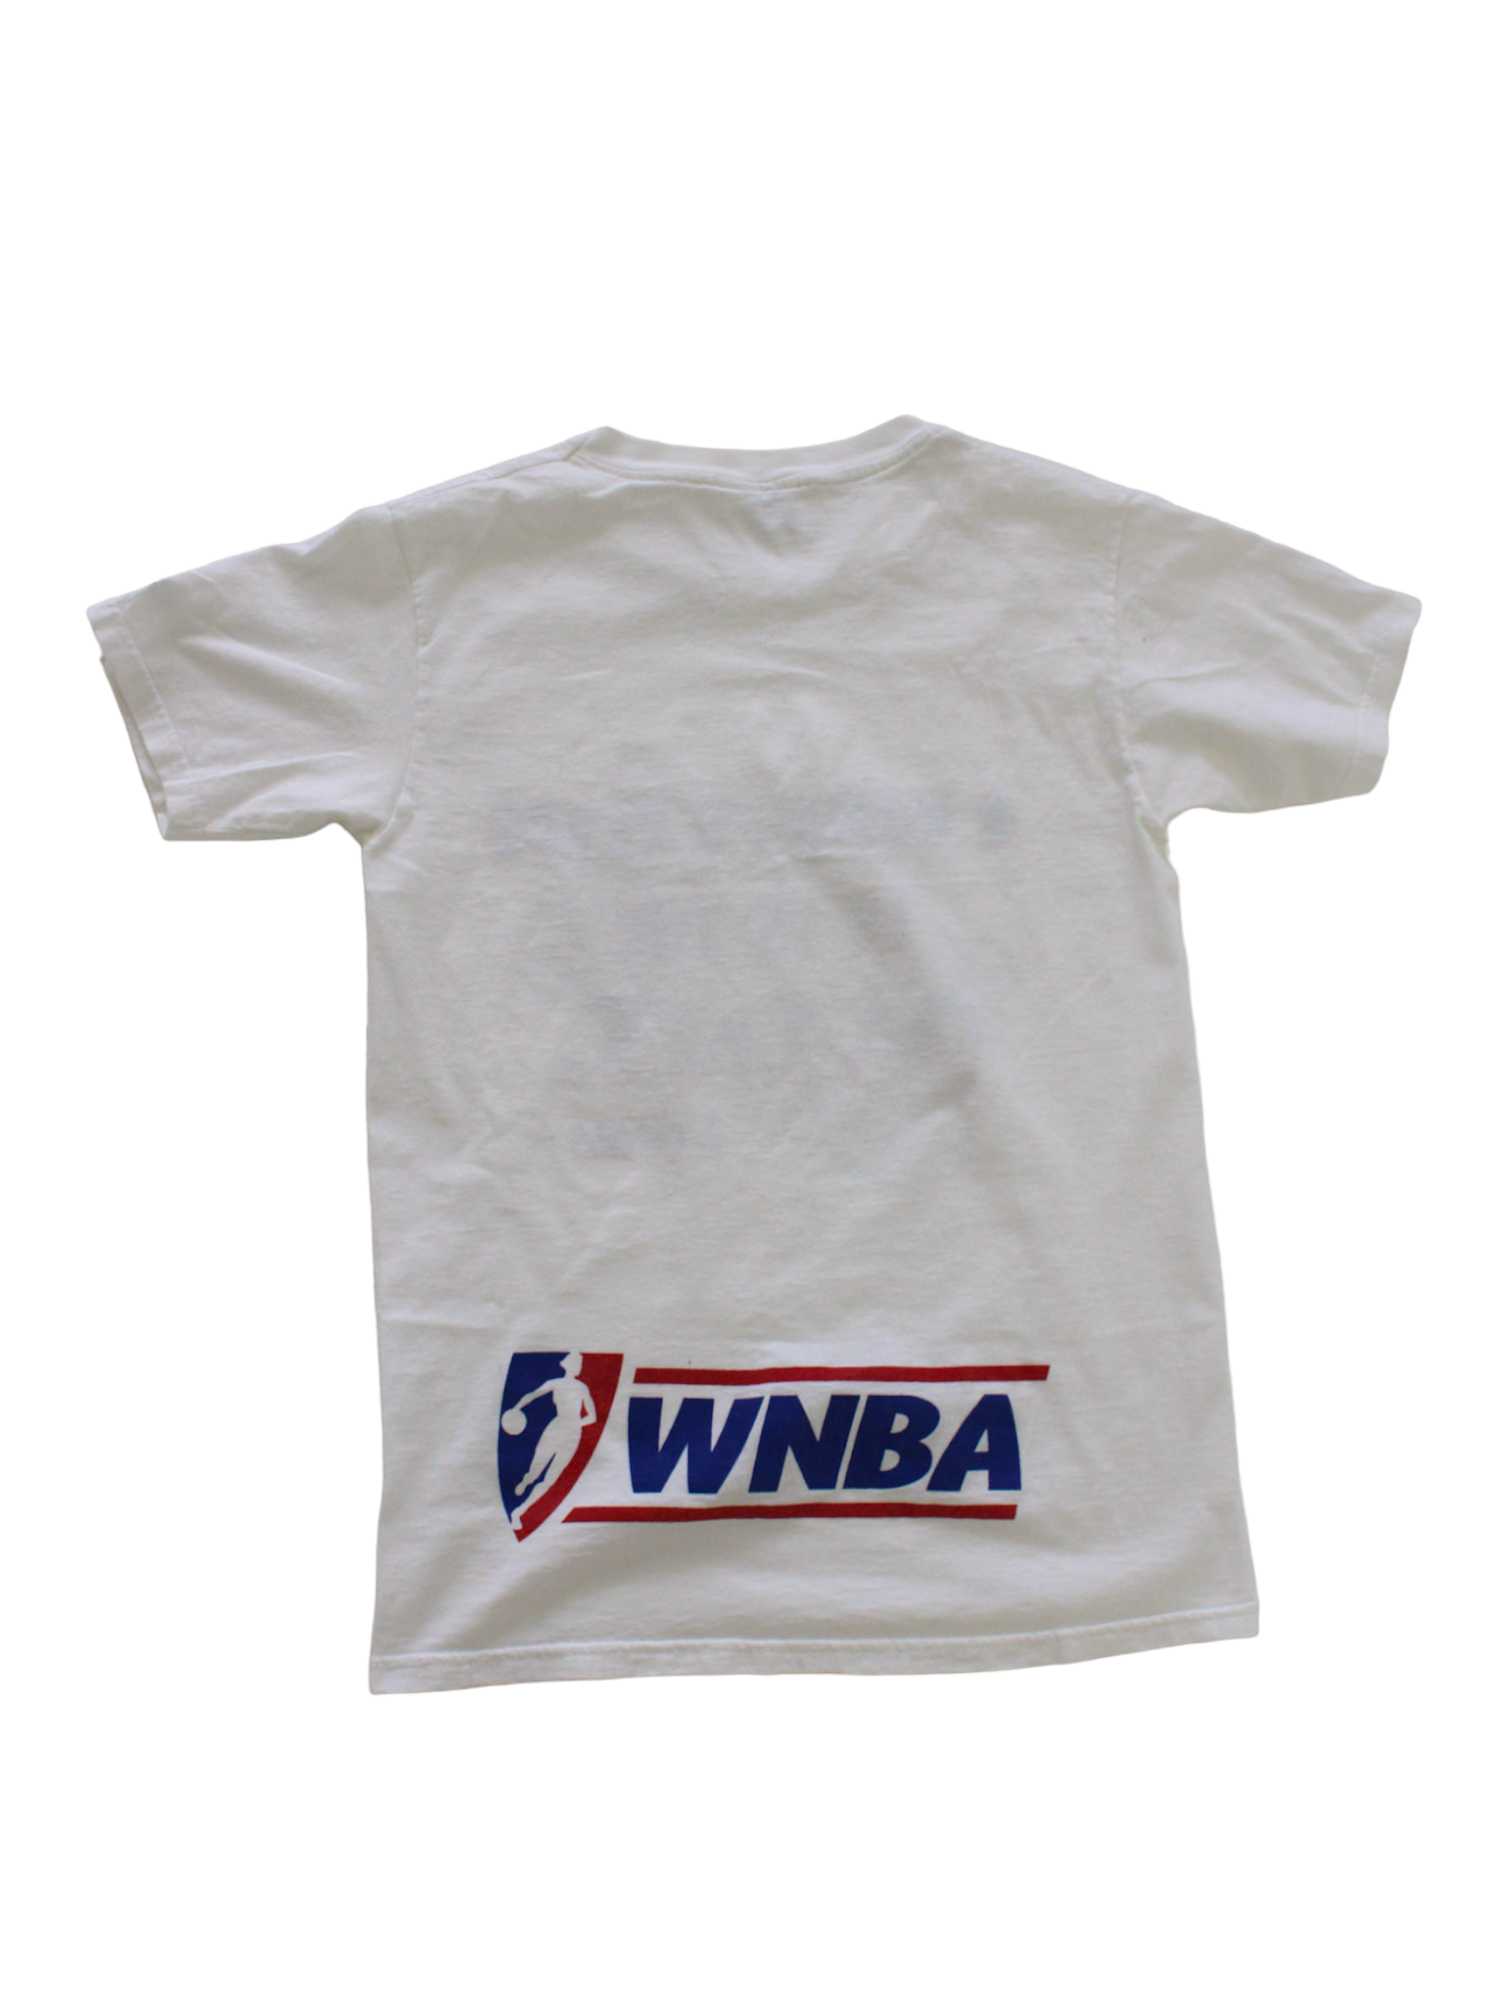 RARE Vintage WNBA 'In the Paint' Tee